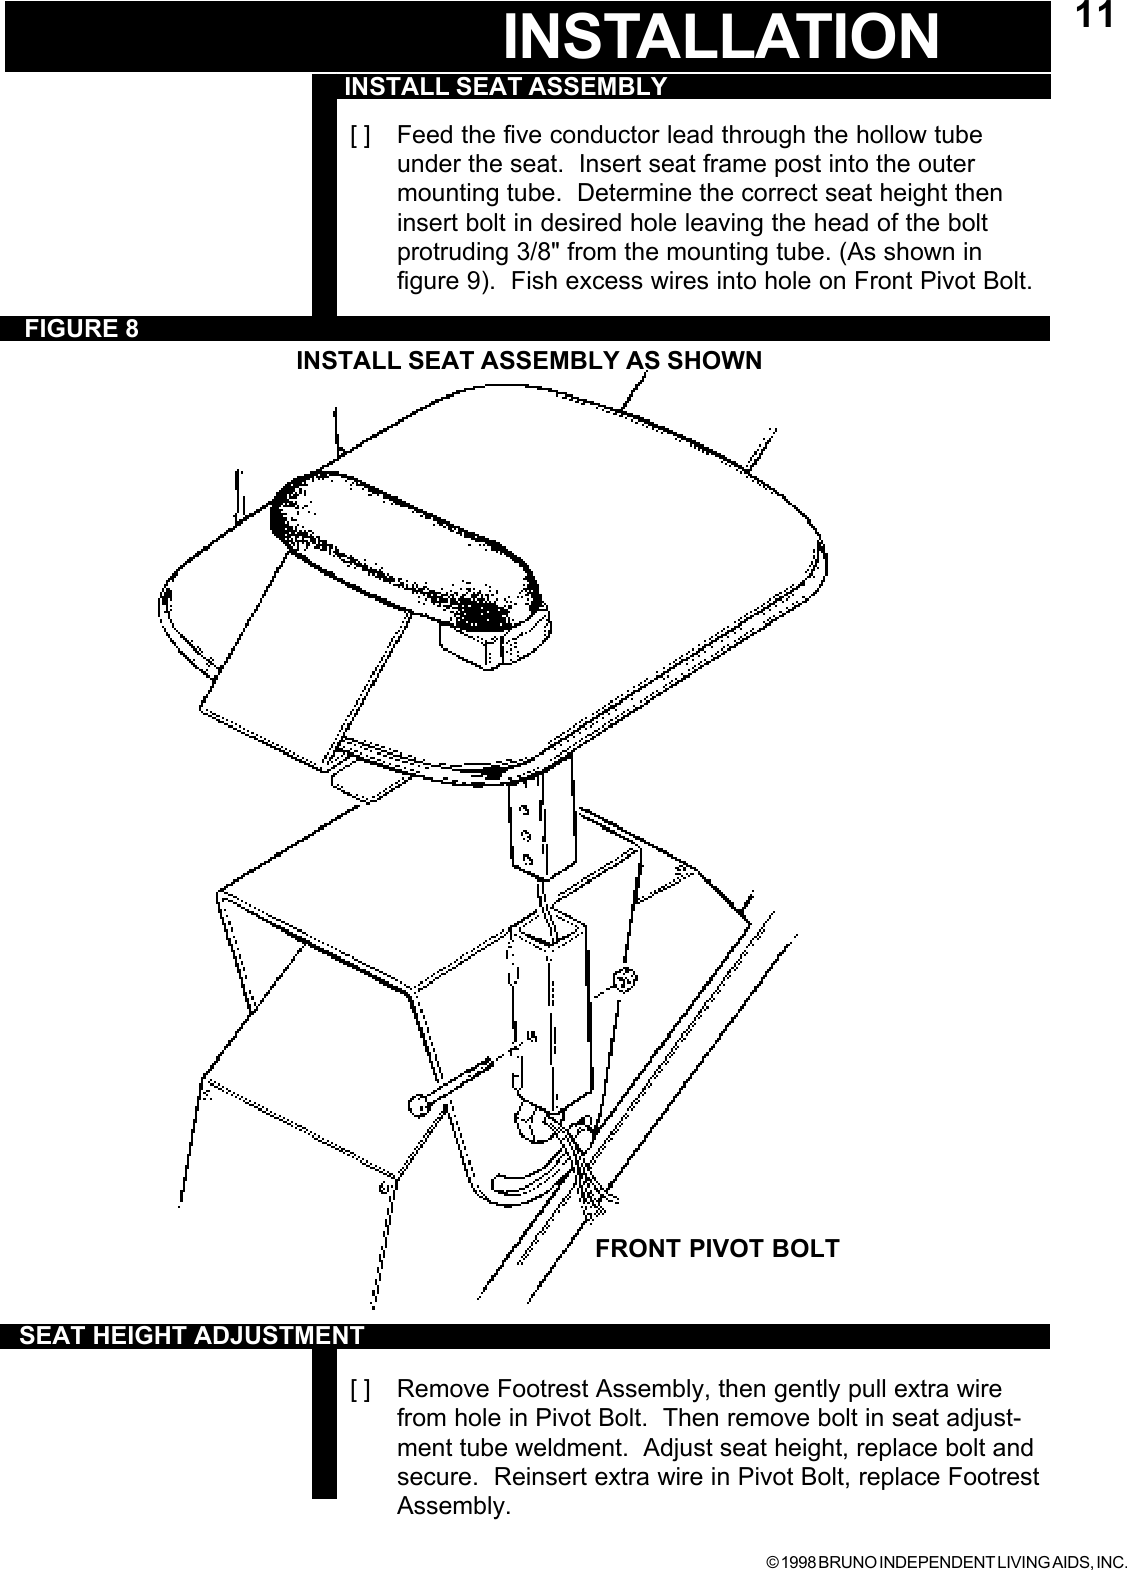 © 1998 BRUNO INDEPENDENT LIVING AIDS, INC.11[ ] Feed the five conductor lead through the hollow tubeunder the seat.  Insert seat frame post into the outermounting tube.  Determine the correct seat height theninsert bolt in desired hole leaving the head of the boltprotruding 3/8&quot; from the mounting tube. (As shown infigure 9).  Fish excess wires into hole on Front Pivot Bolt.[ ] Remove Footrest Assembly, then gently pull extra wirefrom hole in Pivot Bolt.  Then remove bolt in seat adjust-ment tube weldment.  Adjust seat height, replace bolt andsecure.  Reinsert extra wire in Pivot Bolt, replace FootrestAssembly.INSTALL SEAT ASSEMBLYFIGURE 8INSTALL SEAT ASSEMBLY AS SHOWNINSTALLATIONSEAT HEIGHT ADJUSTMENTFRONT PIVOT BOLT